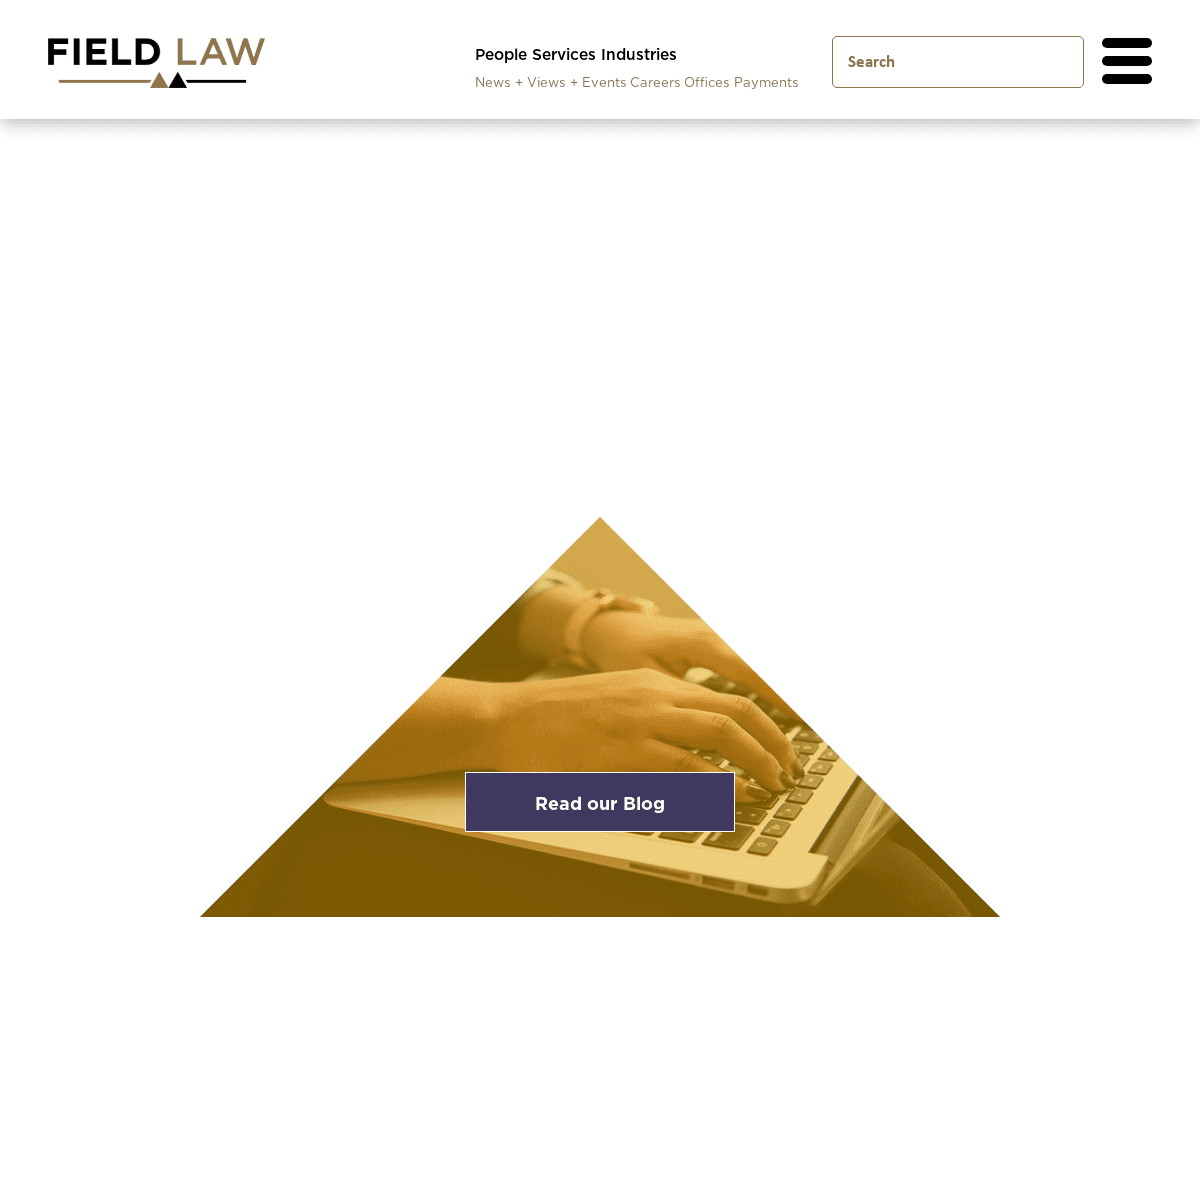 A complete backup of https://fieldlaw.com